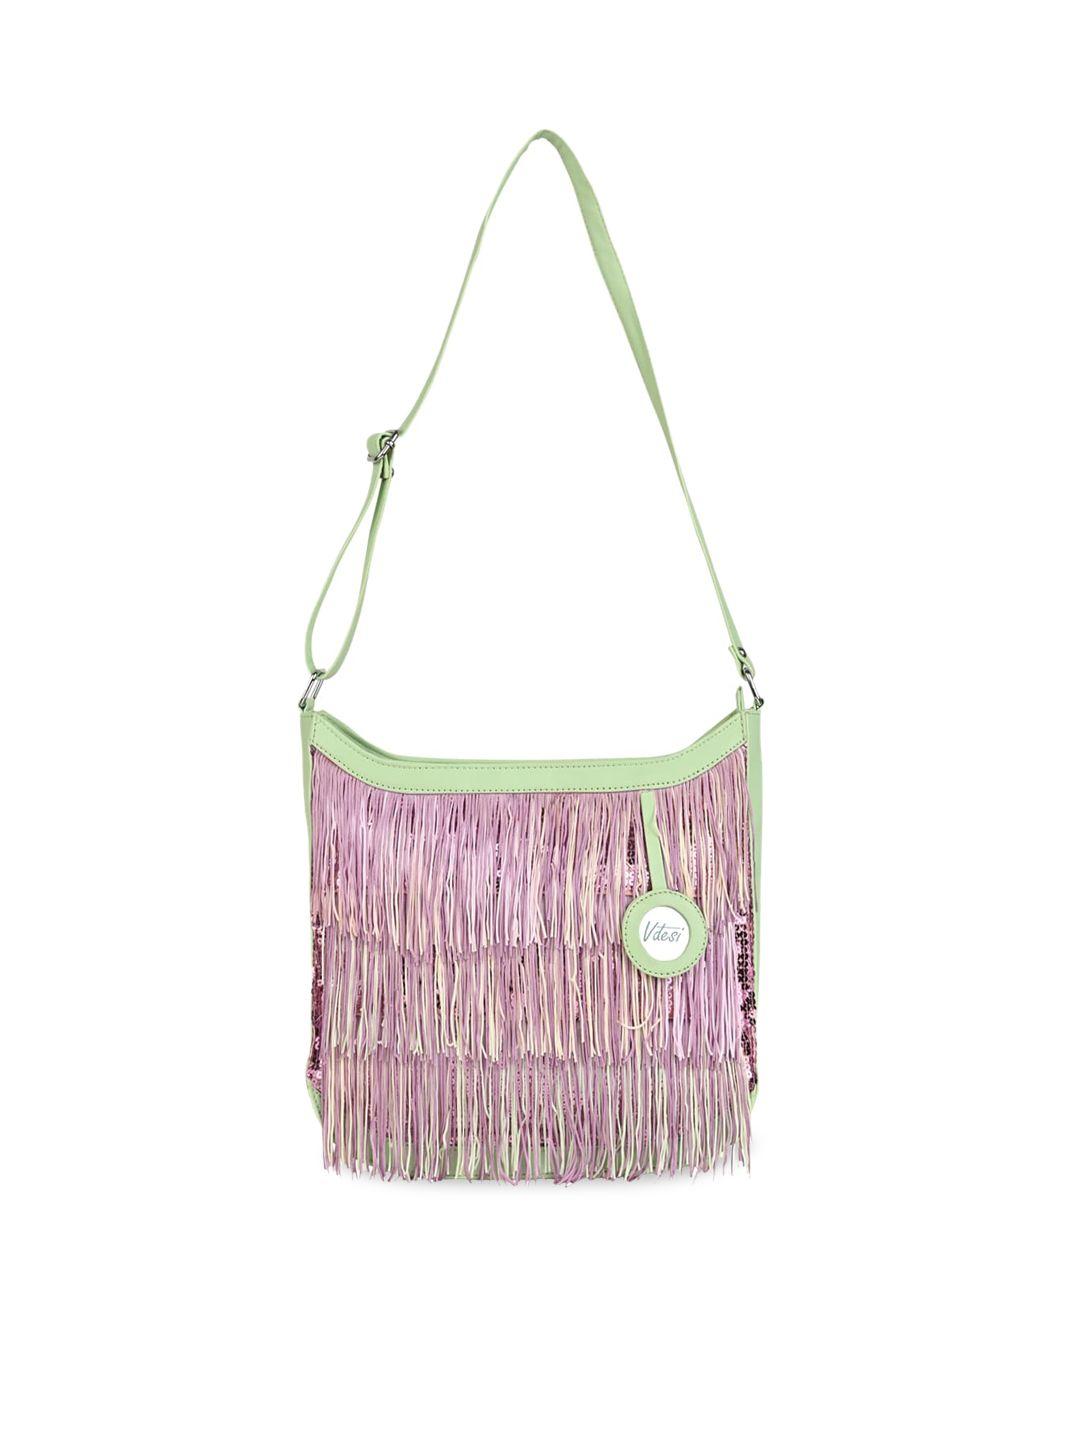 vdesi teal pu structured sling bag with fringed